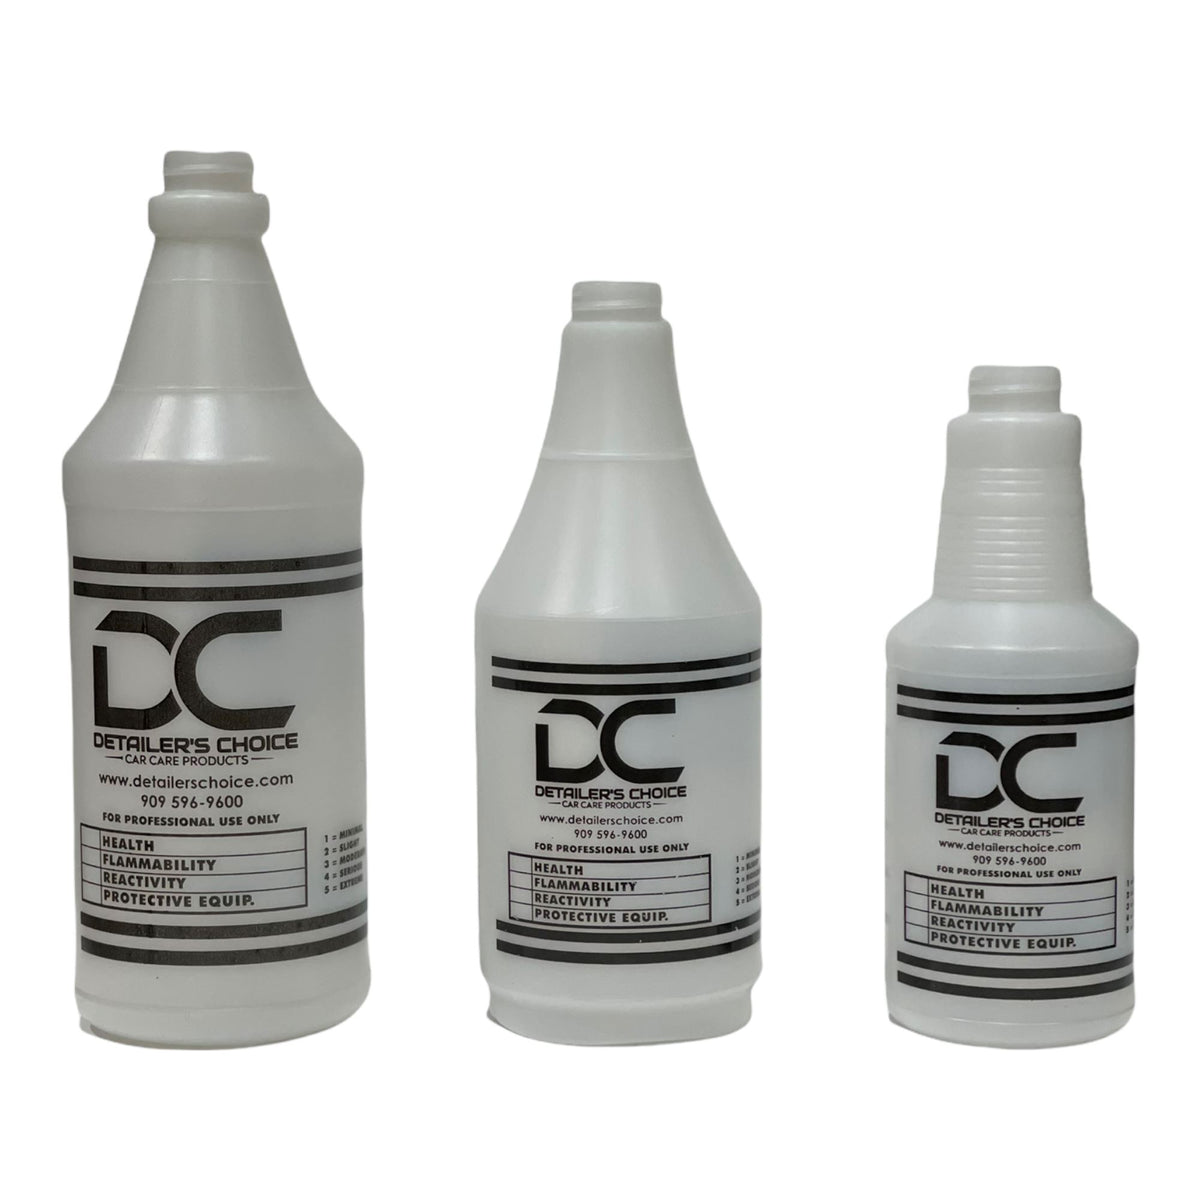 Secondary Container Dilution Bottle with Natural Sprayer (3 Pack), 16 oz.